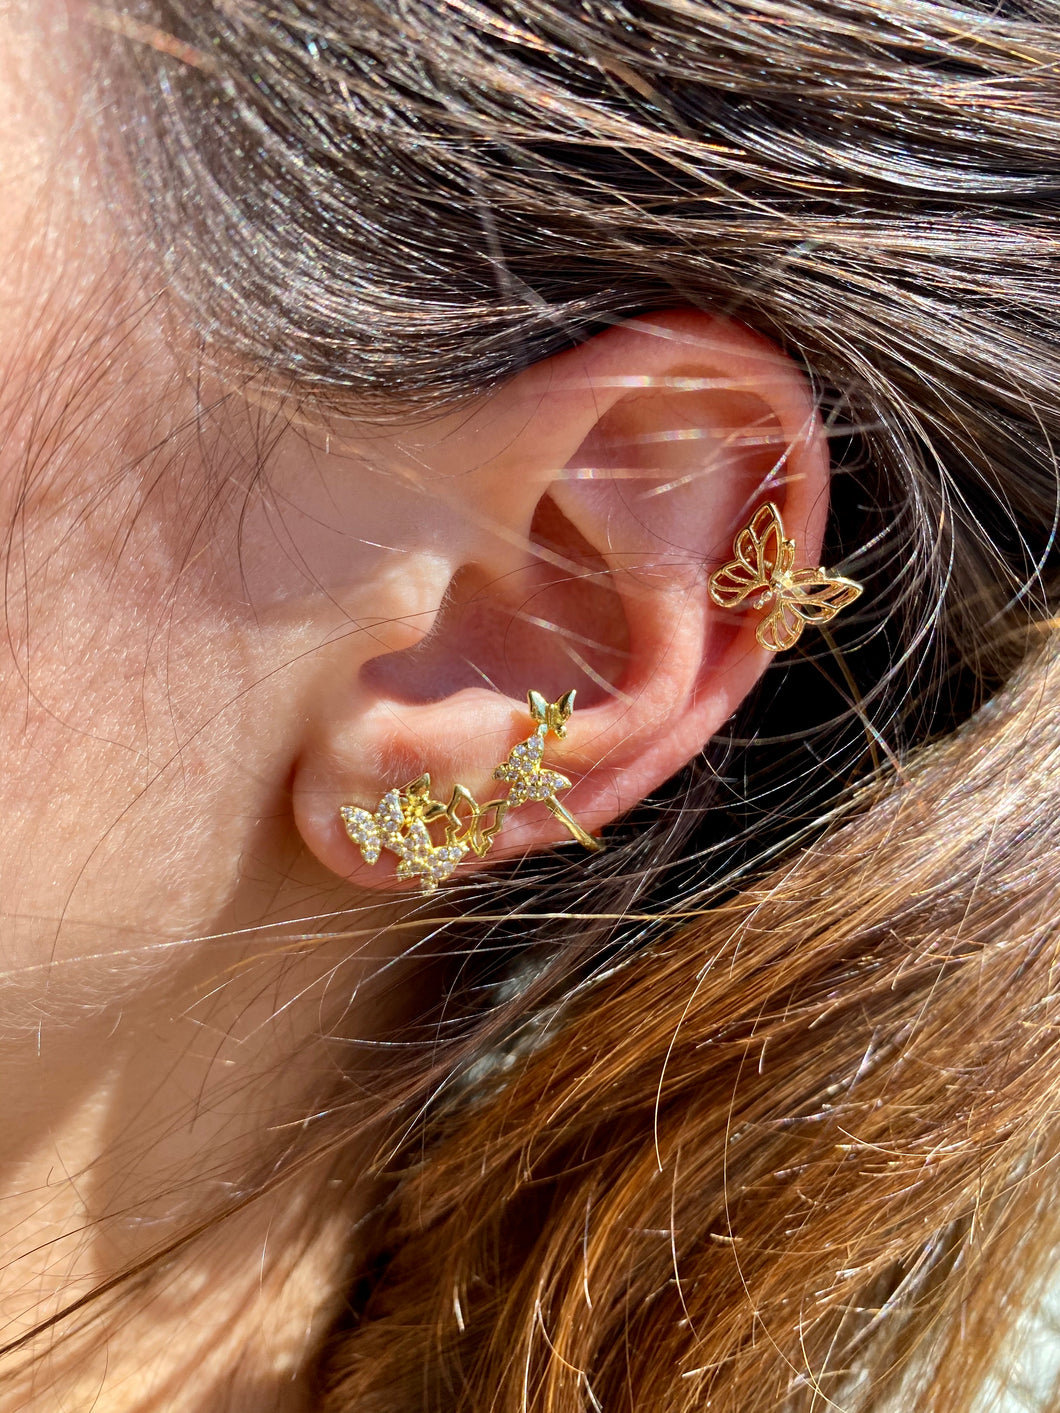 Uniquely You Butterfly Ear Climber Earrings with Ear Cuff